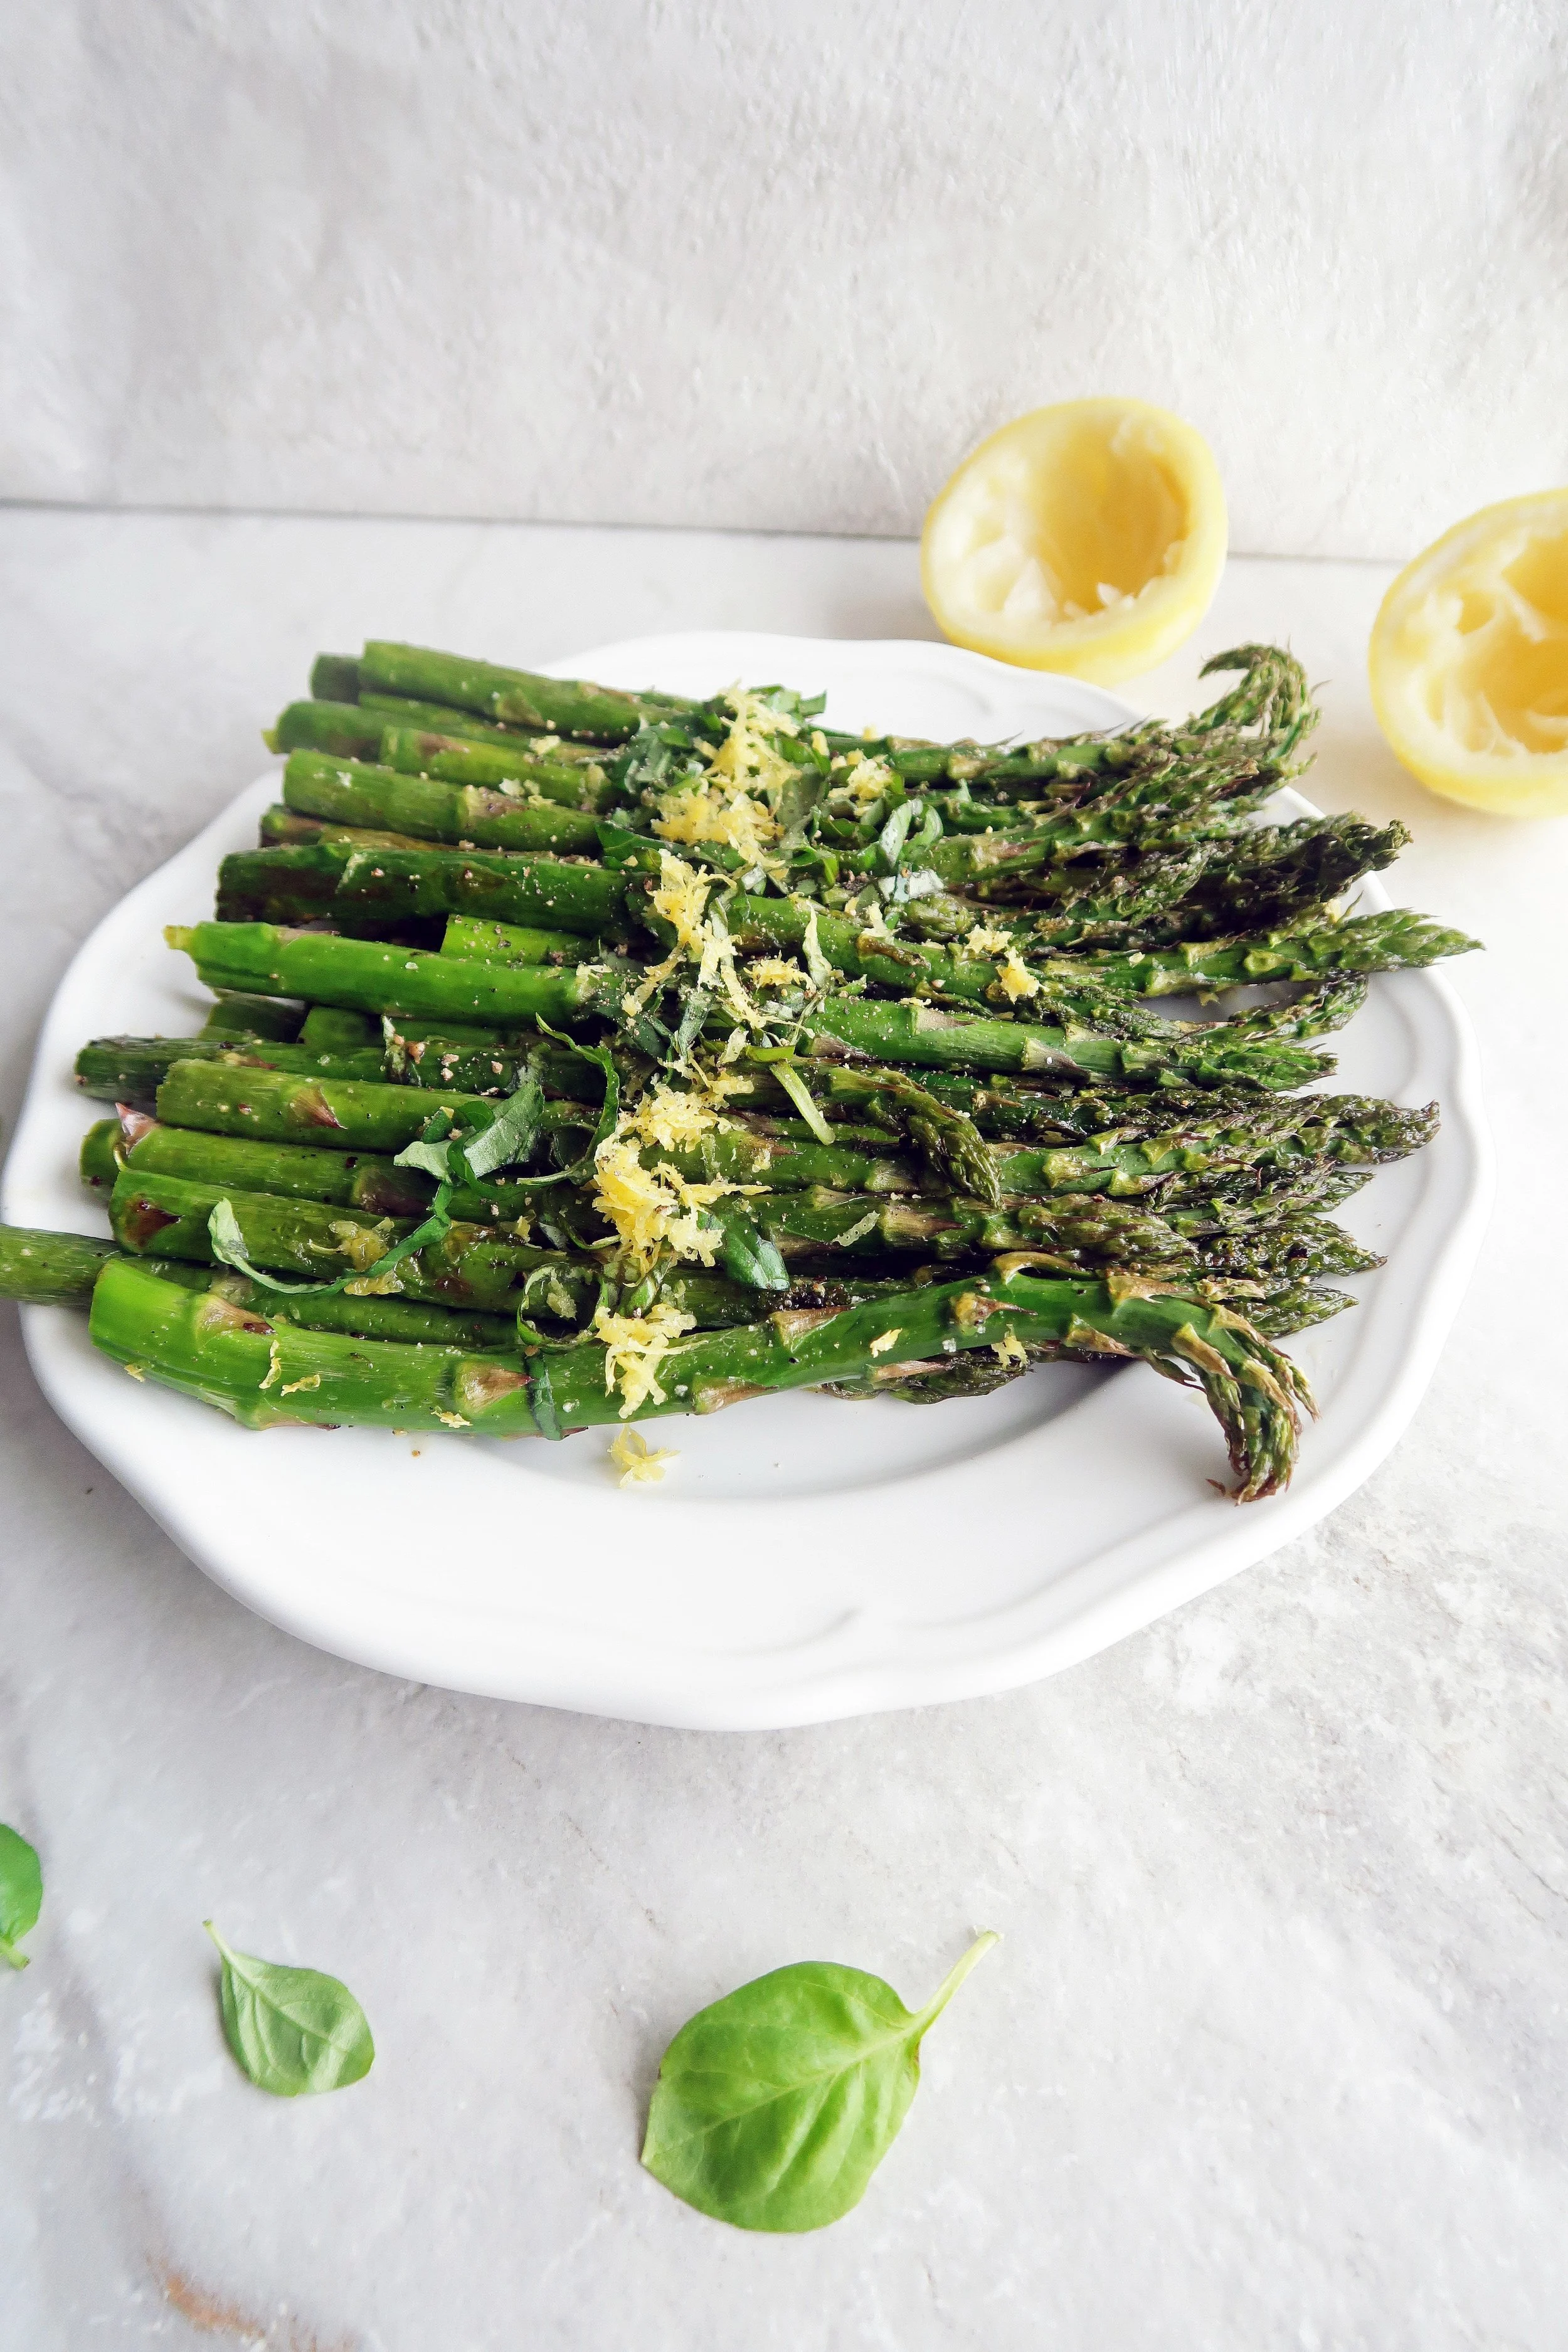 Vegan and gluten-free roasted asparagus with lemon and fresh basil on a white plate.